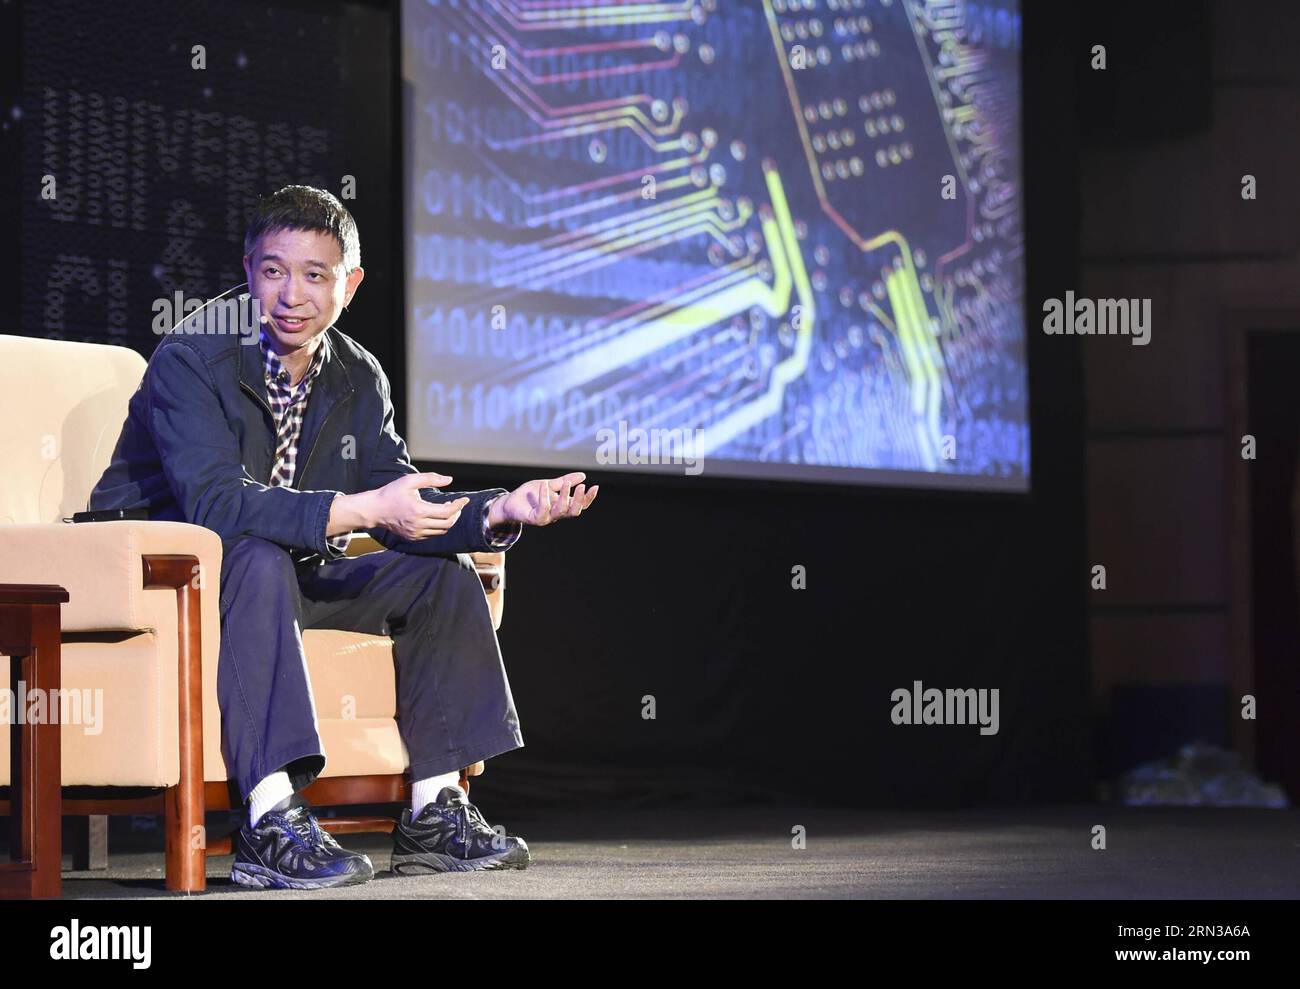 (150411) -- HANGZHOU, April 11, 2015 -- Wang Jian, Chief Technology Officer (CTO) of Alibaba group, whose business-to-consumer marketplace TMall.com and consumer-to-consumer website Taobao.com claim the lion s share of China s online retail sales, speaks at the forum of 2015 Pineapple Science Award in Hangzhou, capital of east China s Zhejiang Province, April 11, 2015. )(wjq) CHINA-HANGZHOU-PINEAPPLE SCIENCE AWARD-FORUM (CN) BixXiaoyang PUBLICATIONxNOTxINxCHN   Hangzhou April 11 2015 Wang Jian Chief Technology Officer CTO of Alibaba Group whose Business to Consumer Marketplace  Com and Consume Stock Photo